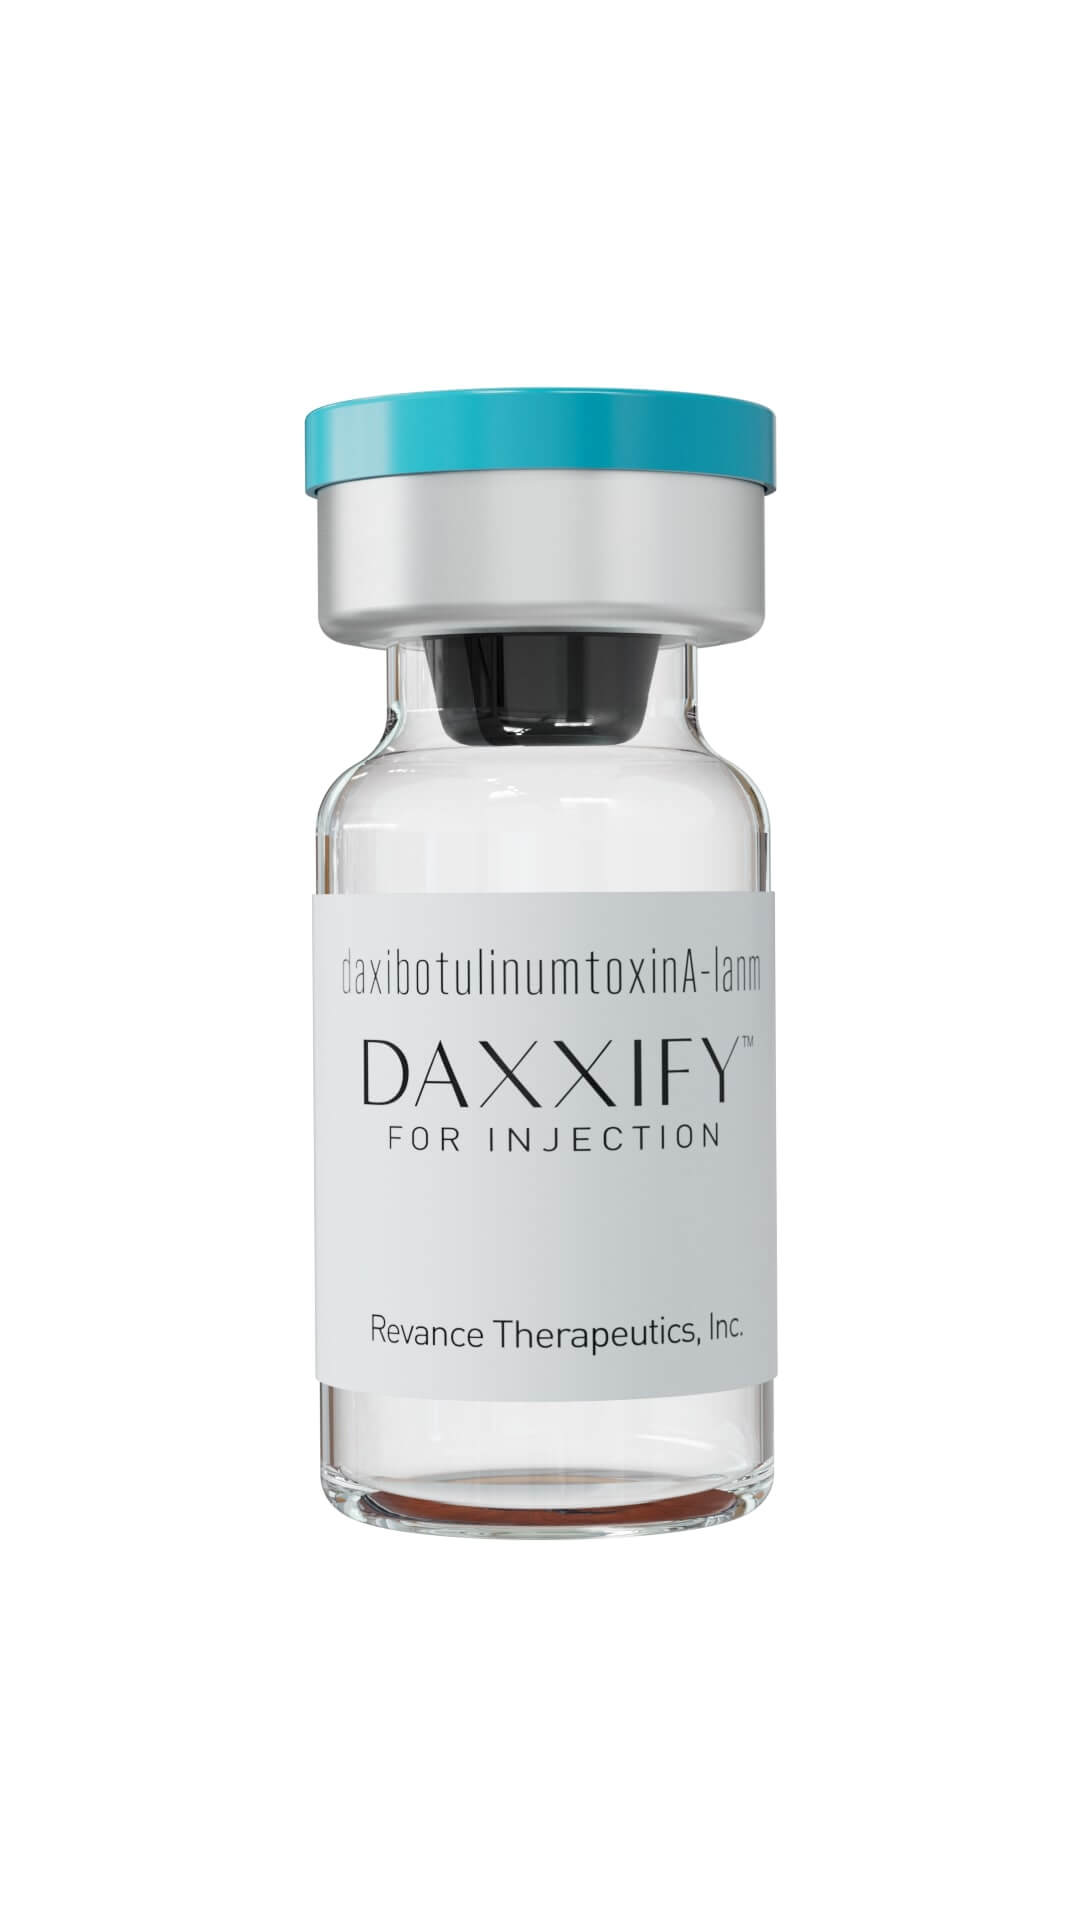 Daxxify Vial Image